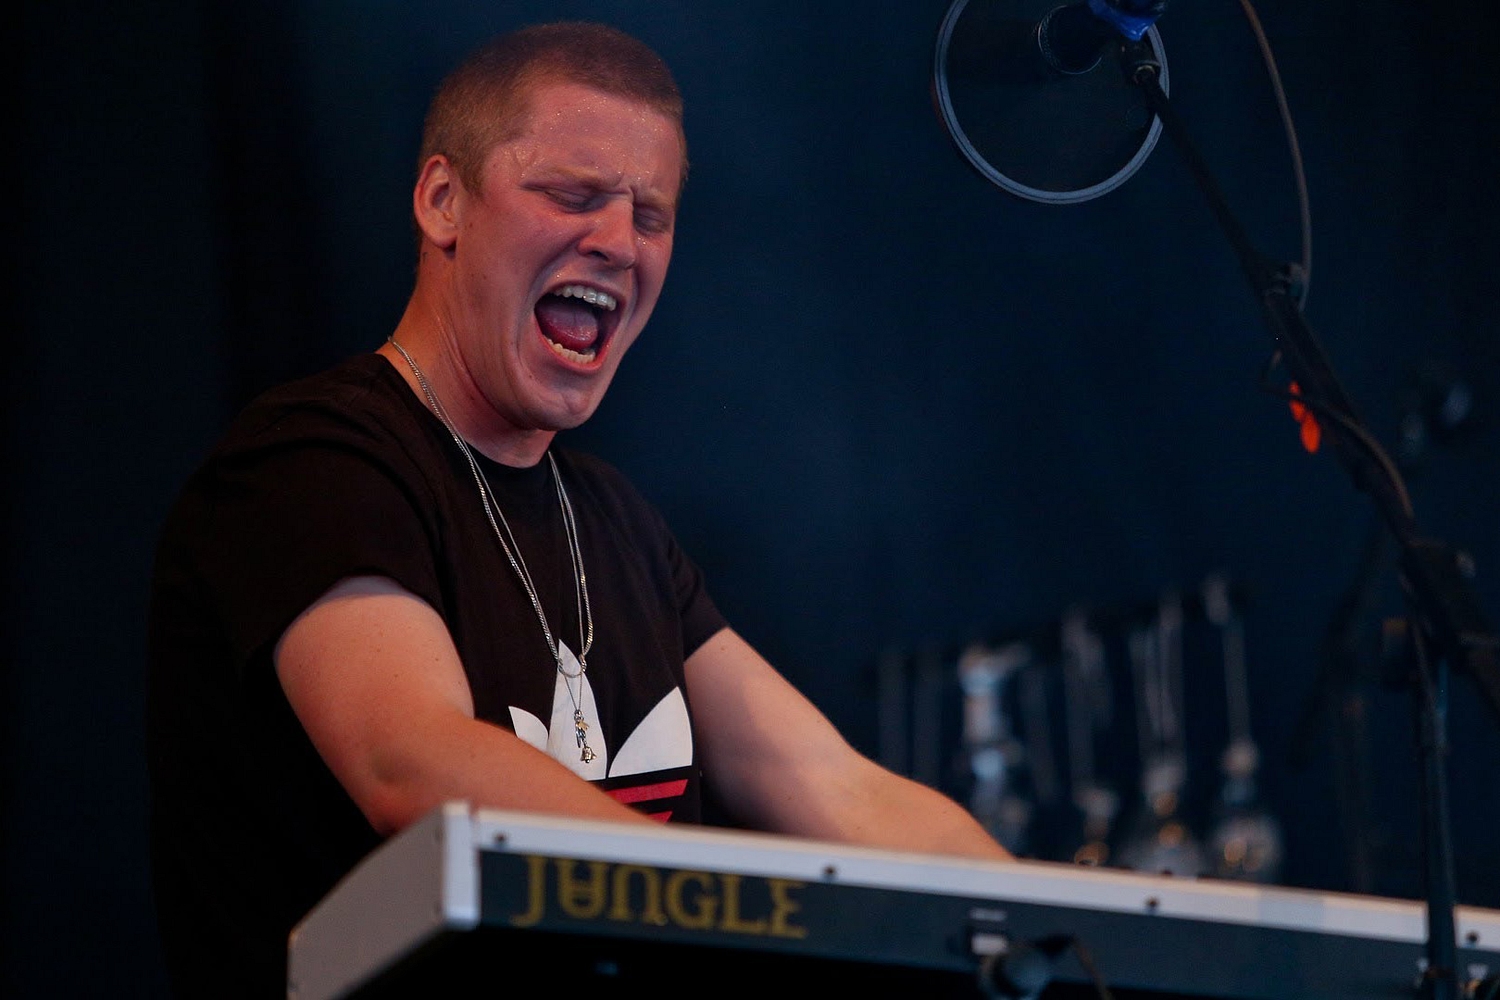 Watch Jungle perform ‘Time’ at Glastonbury